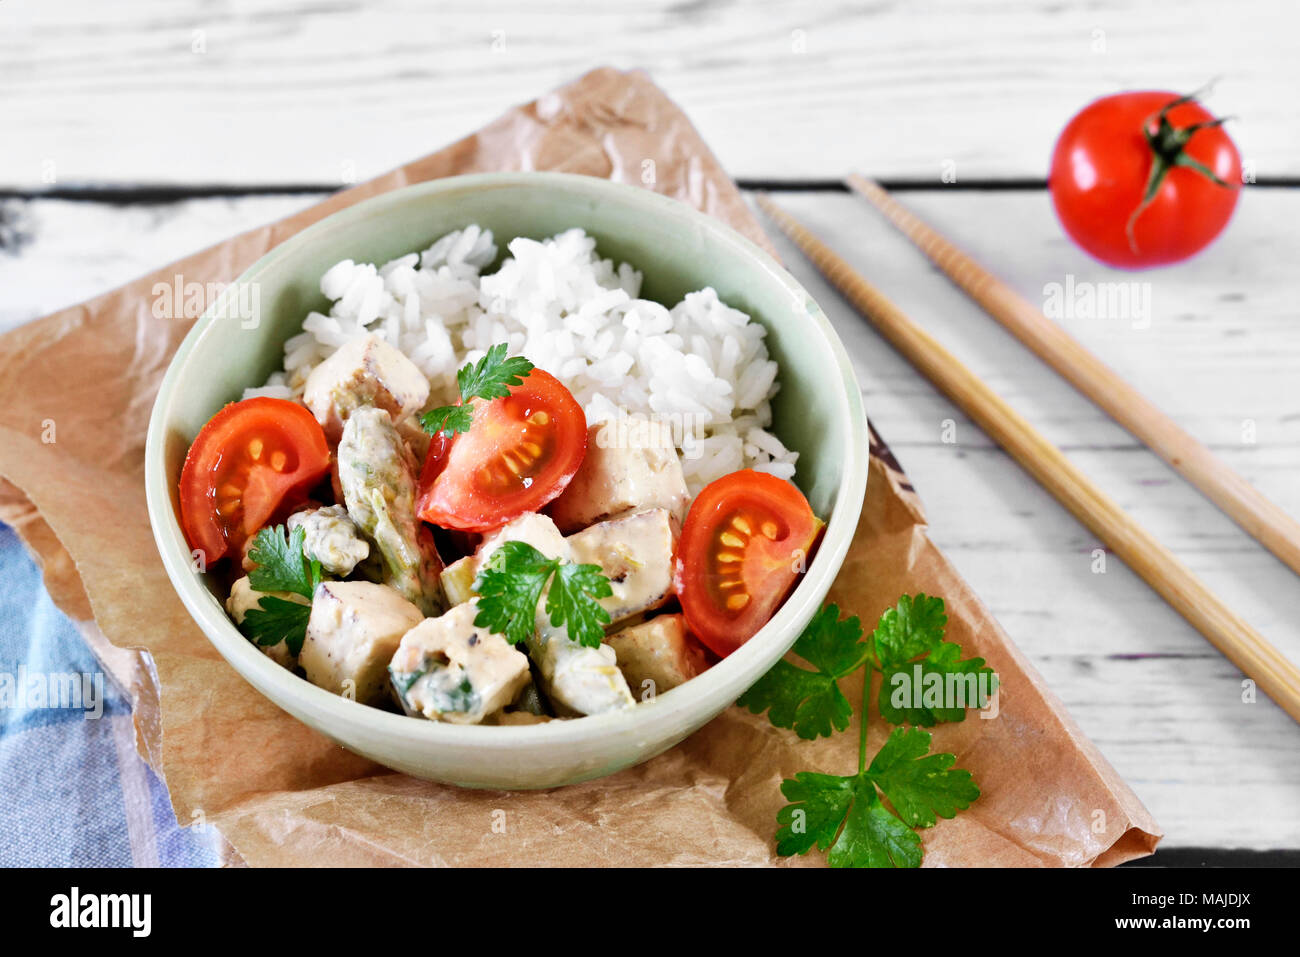 Delicious tofu dish in a bowl, with fresh tomatoes, rice and parsley. Vegan food or vegetarian meal. veggie eating. Stock Photo